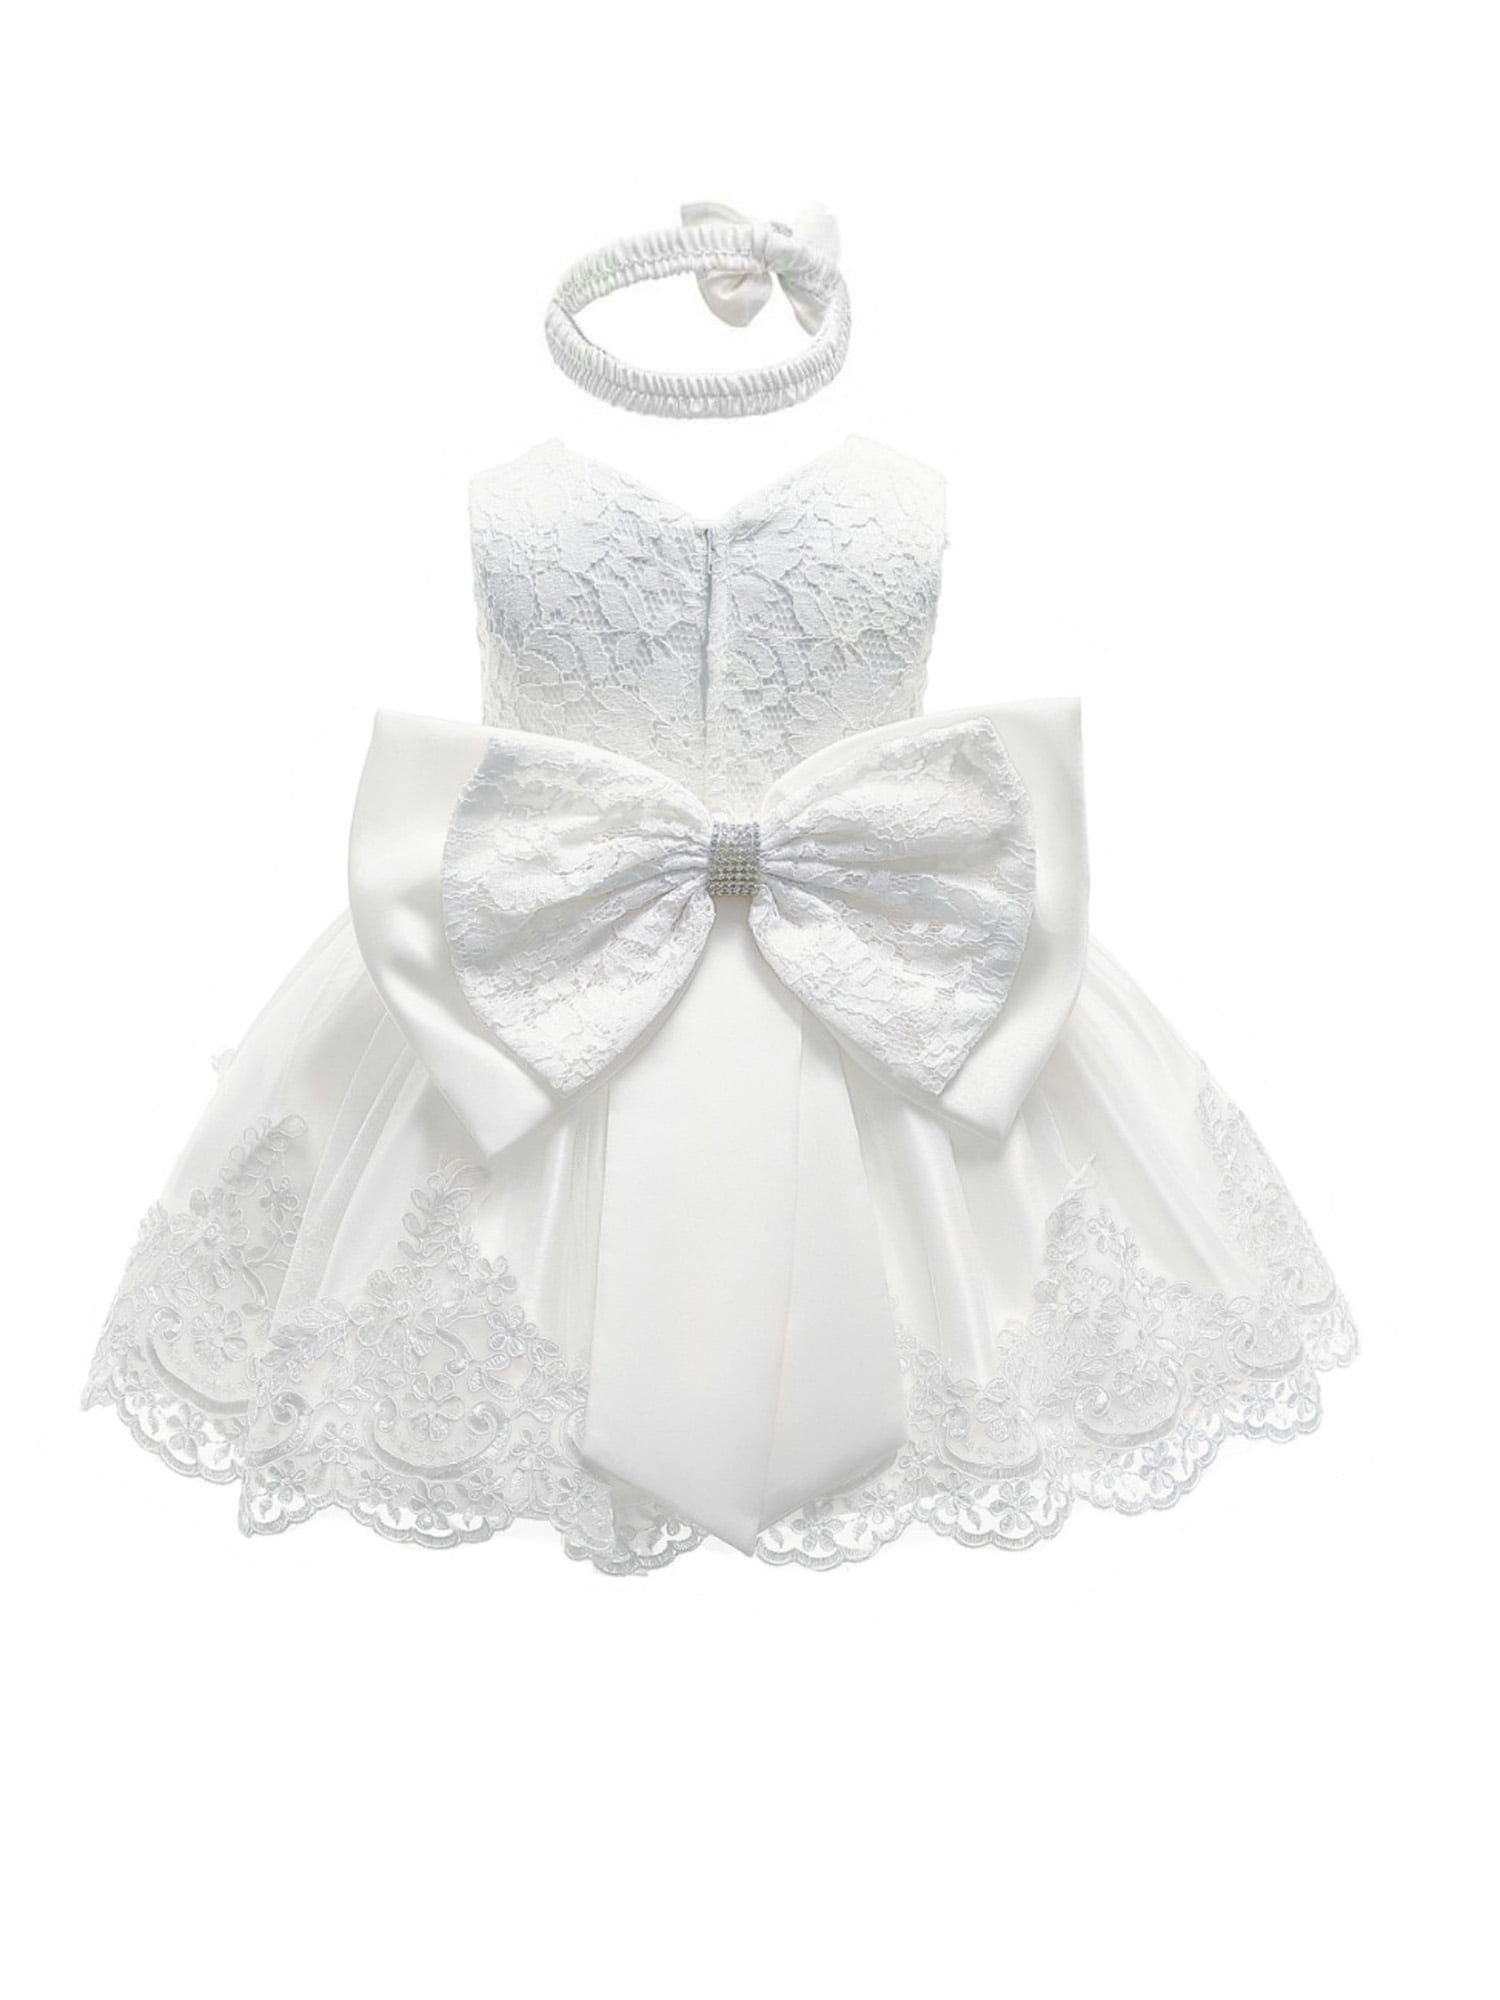 5 Years LZH Baby Girls Party Dress Bowknot Wedding Dress Princess Lace Dress Birthday for 18 Months